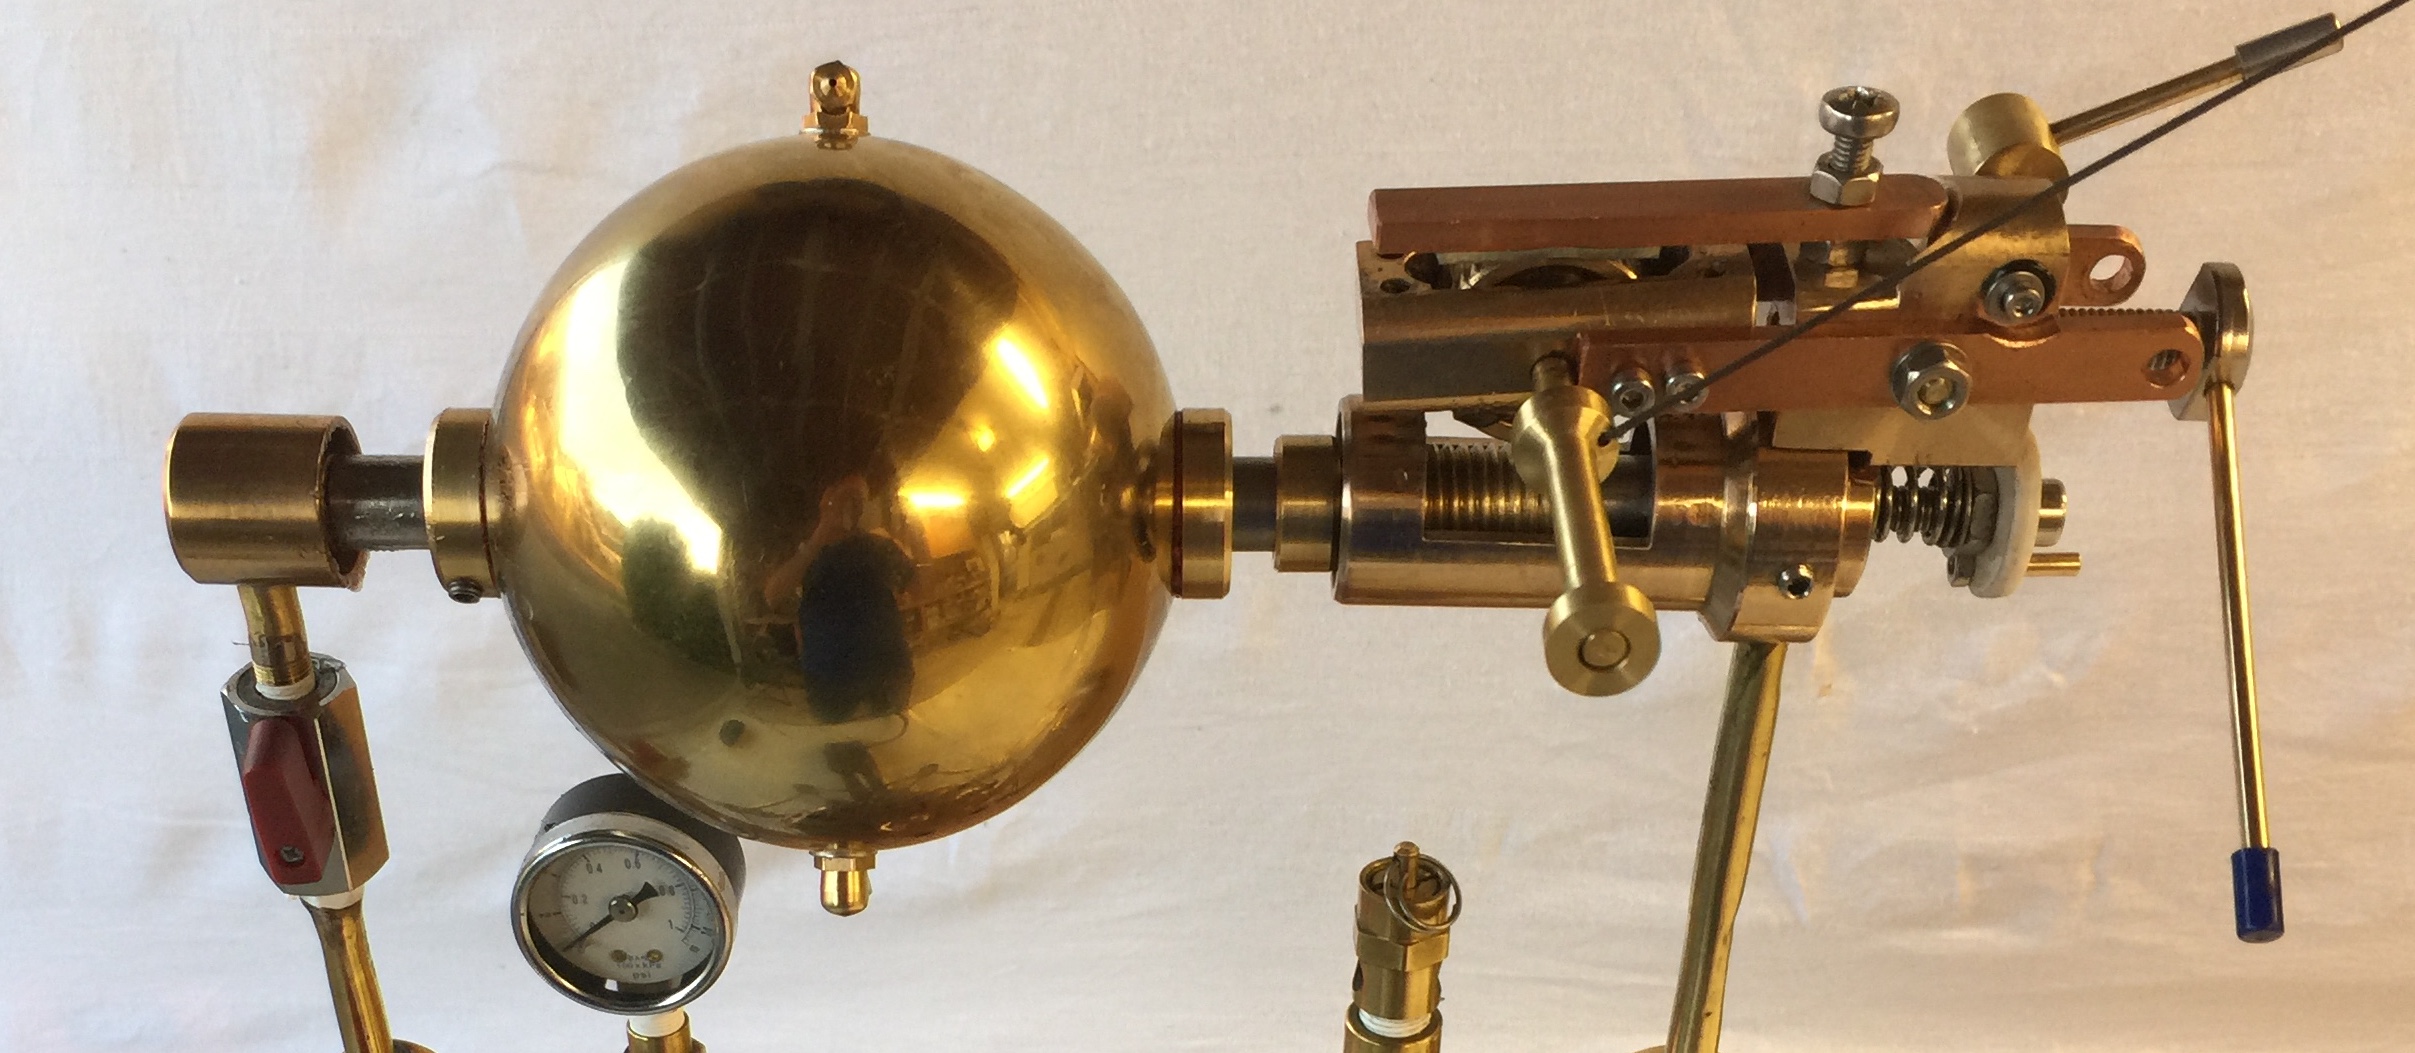 A banner photo of the spinning gold sphere of my new Hero's steam engine version 4